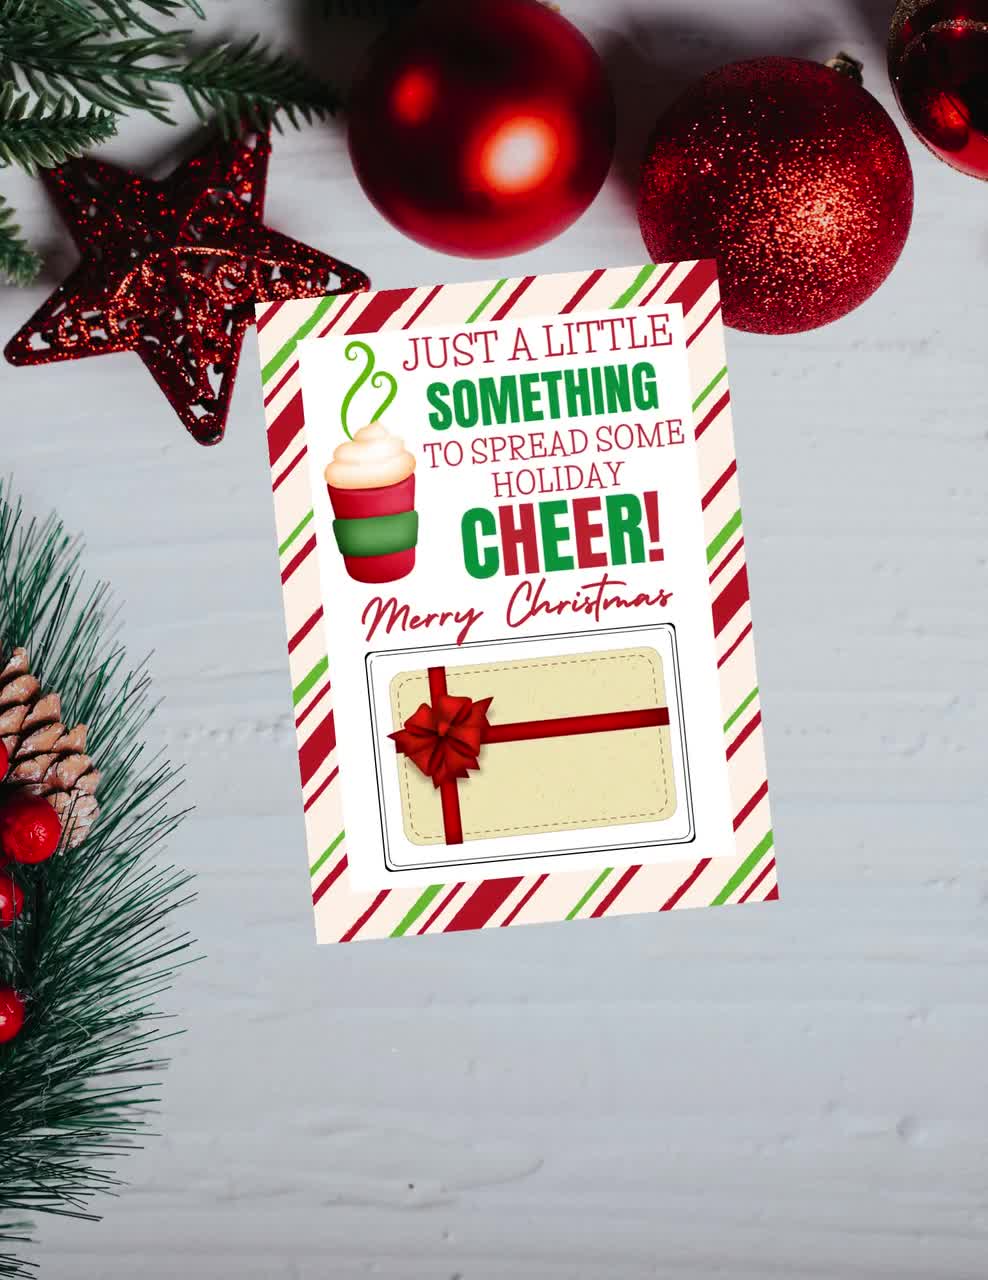 Spread Holiday Cheer with Gift Cards